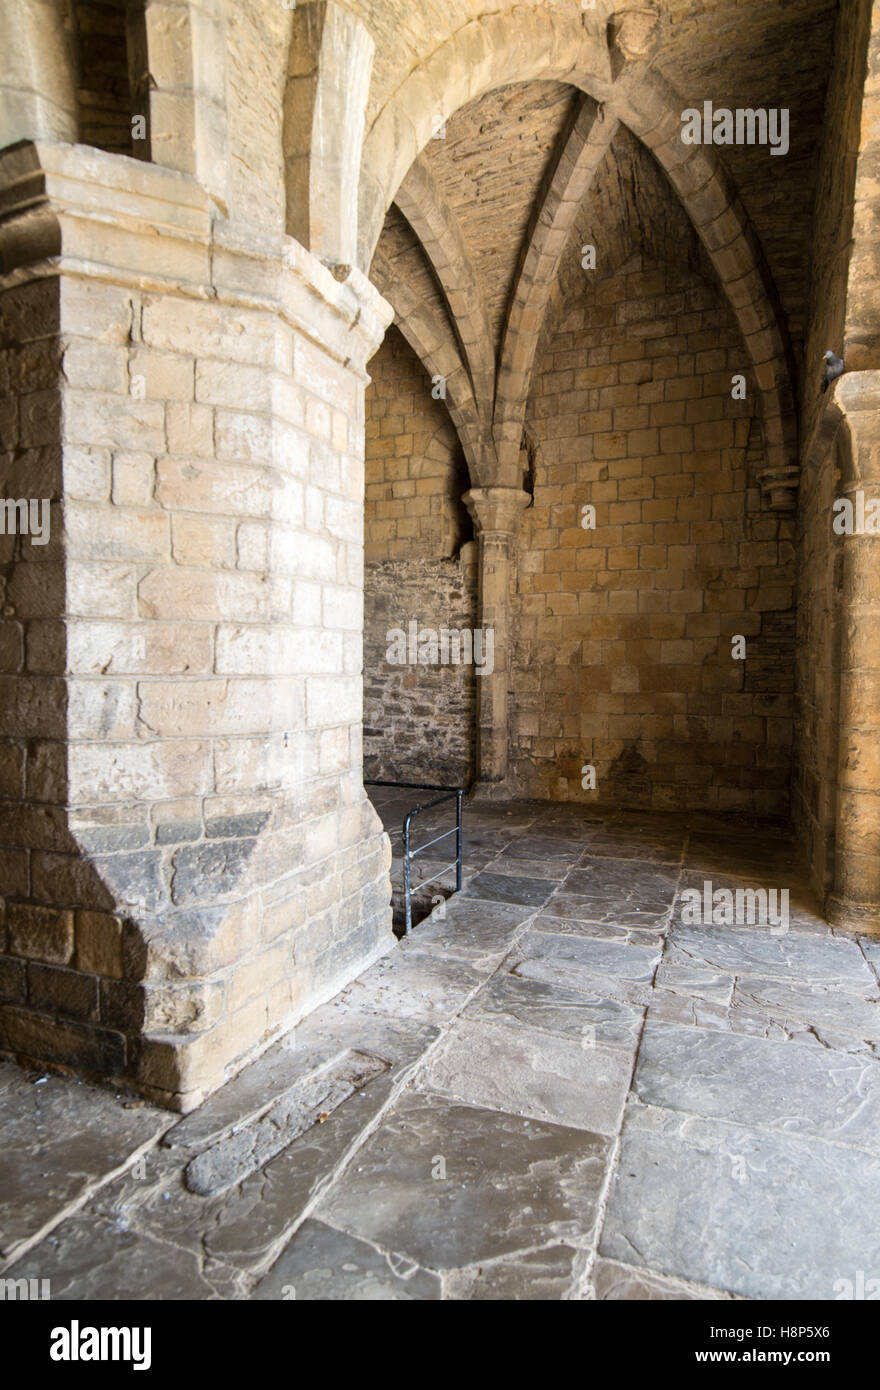 UK, England, Yorkshire, Richmond - The interior of the Richmond Castle, one of North Yorkshire's most popular tourist attraction Stock Photo